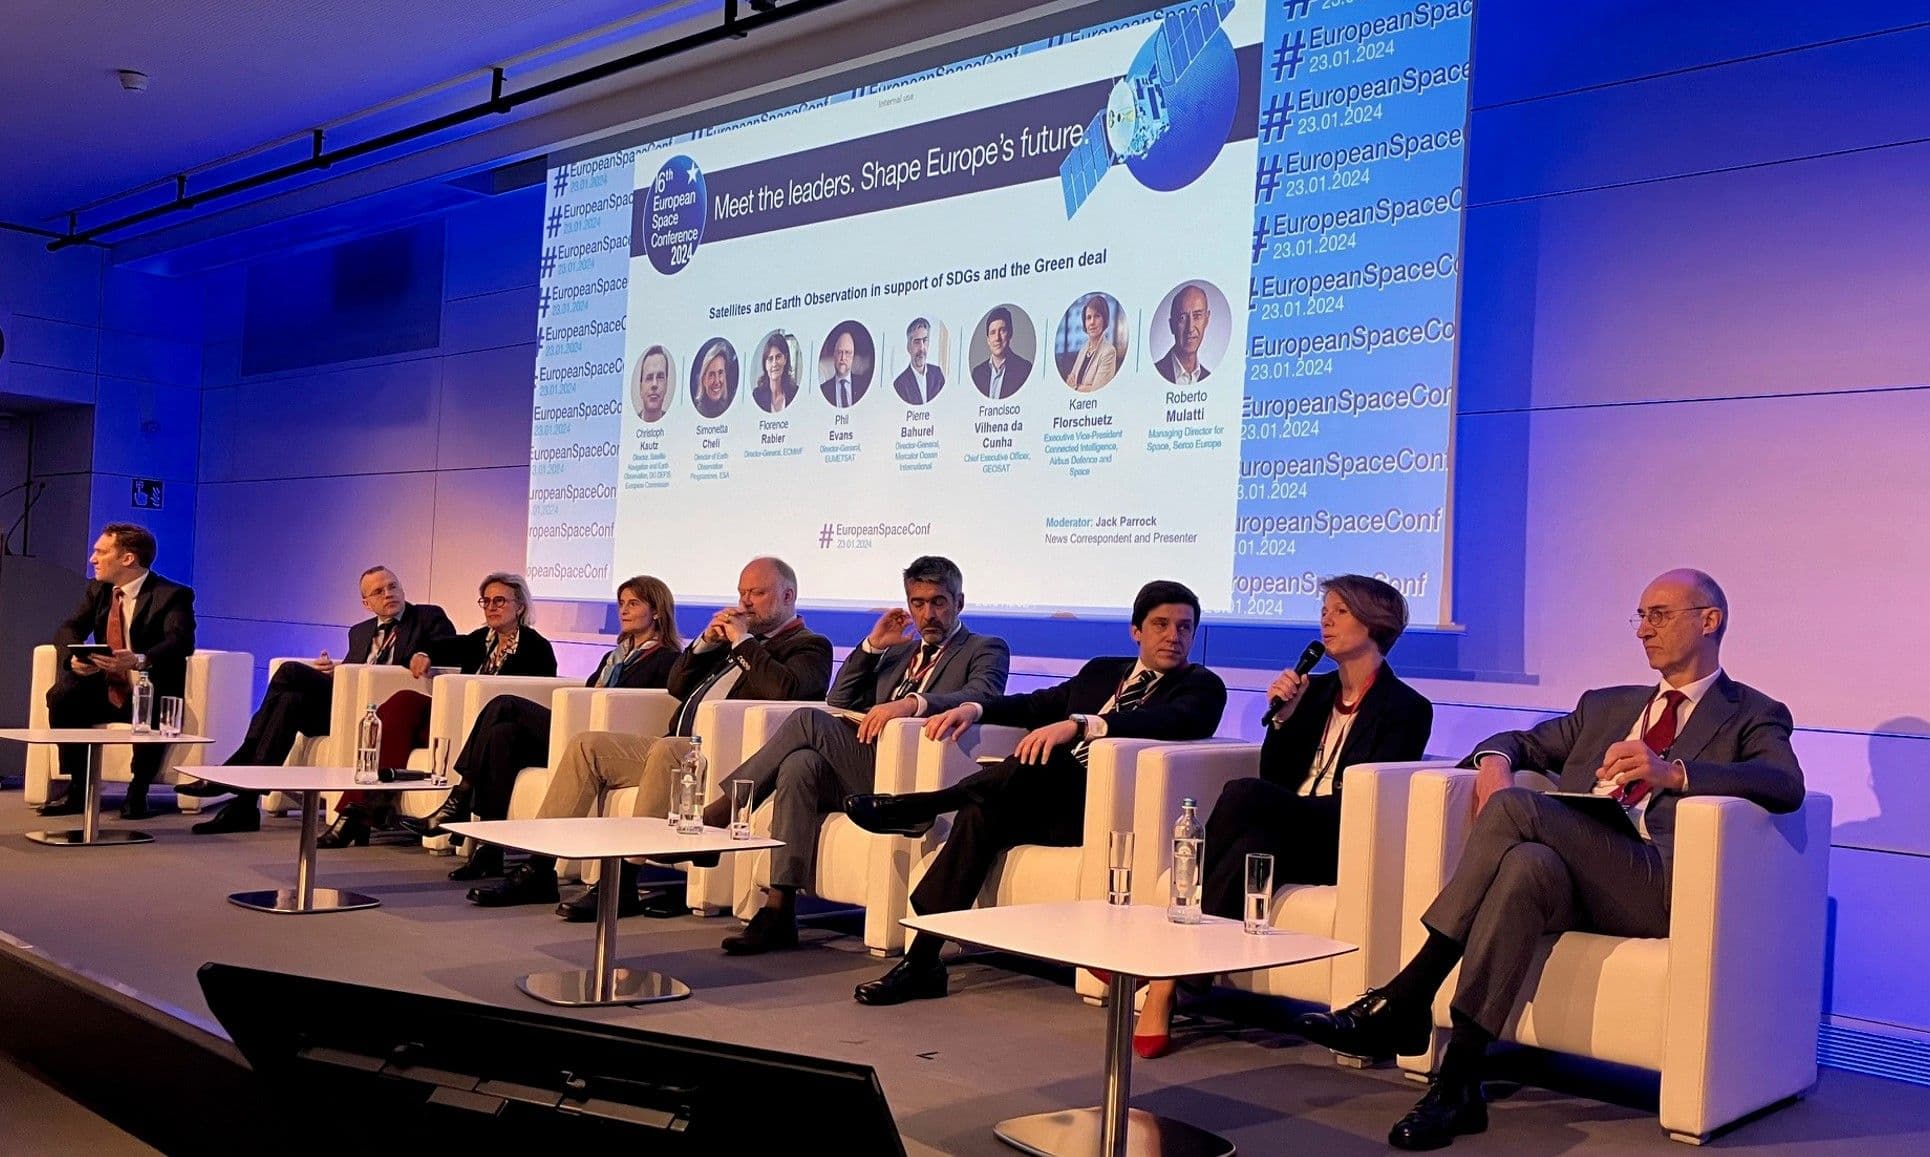 European Space Conference Round table.jpg